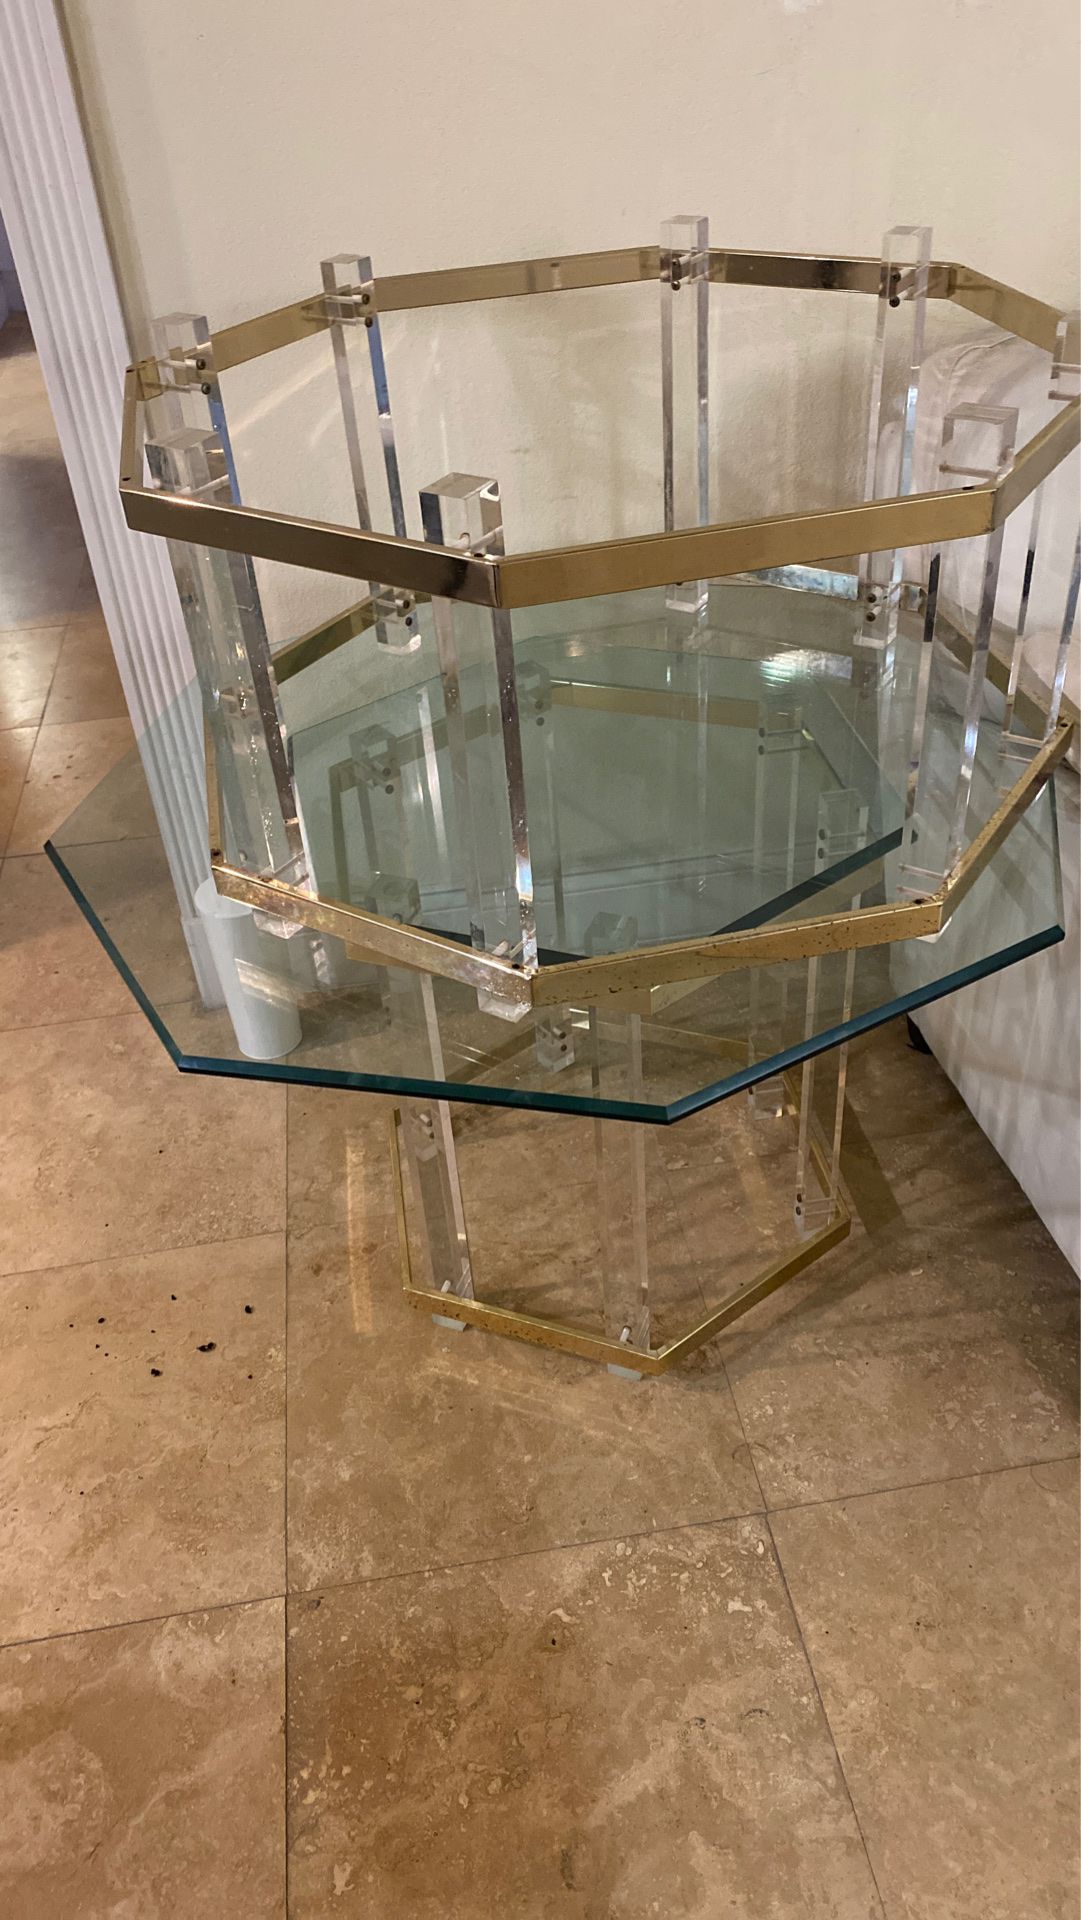 Two living room glass coffee/end tables